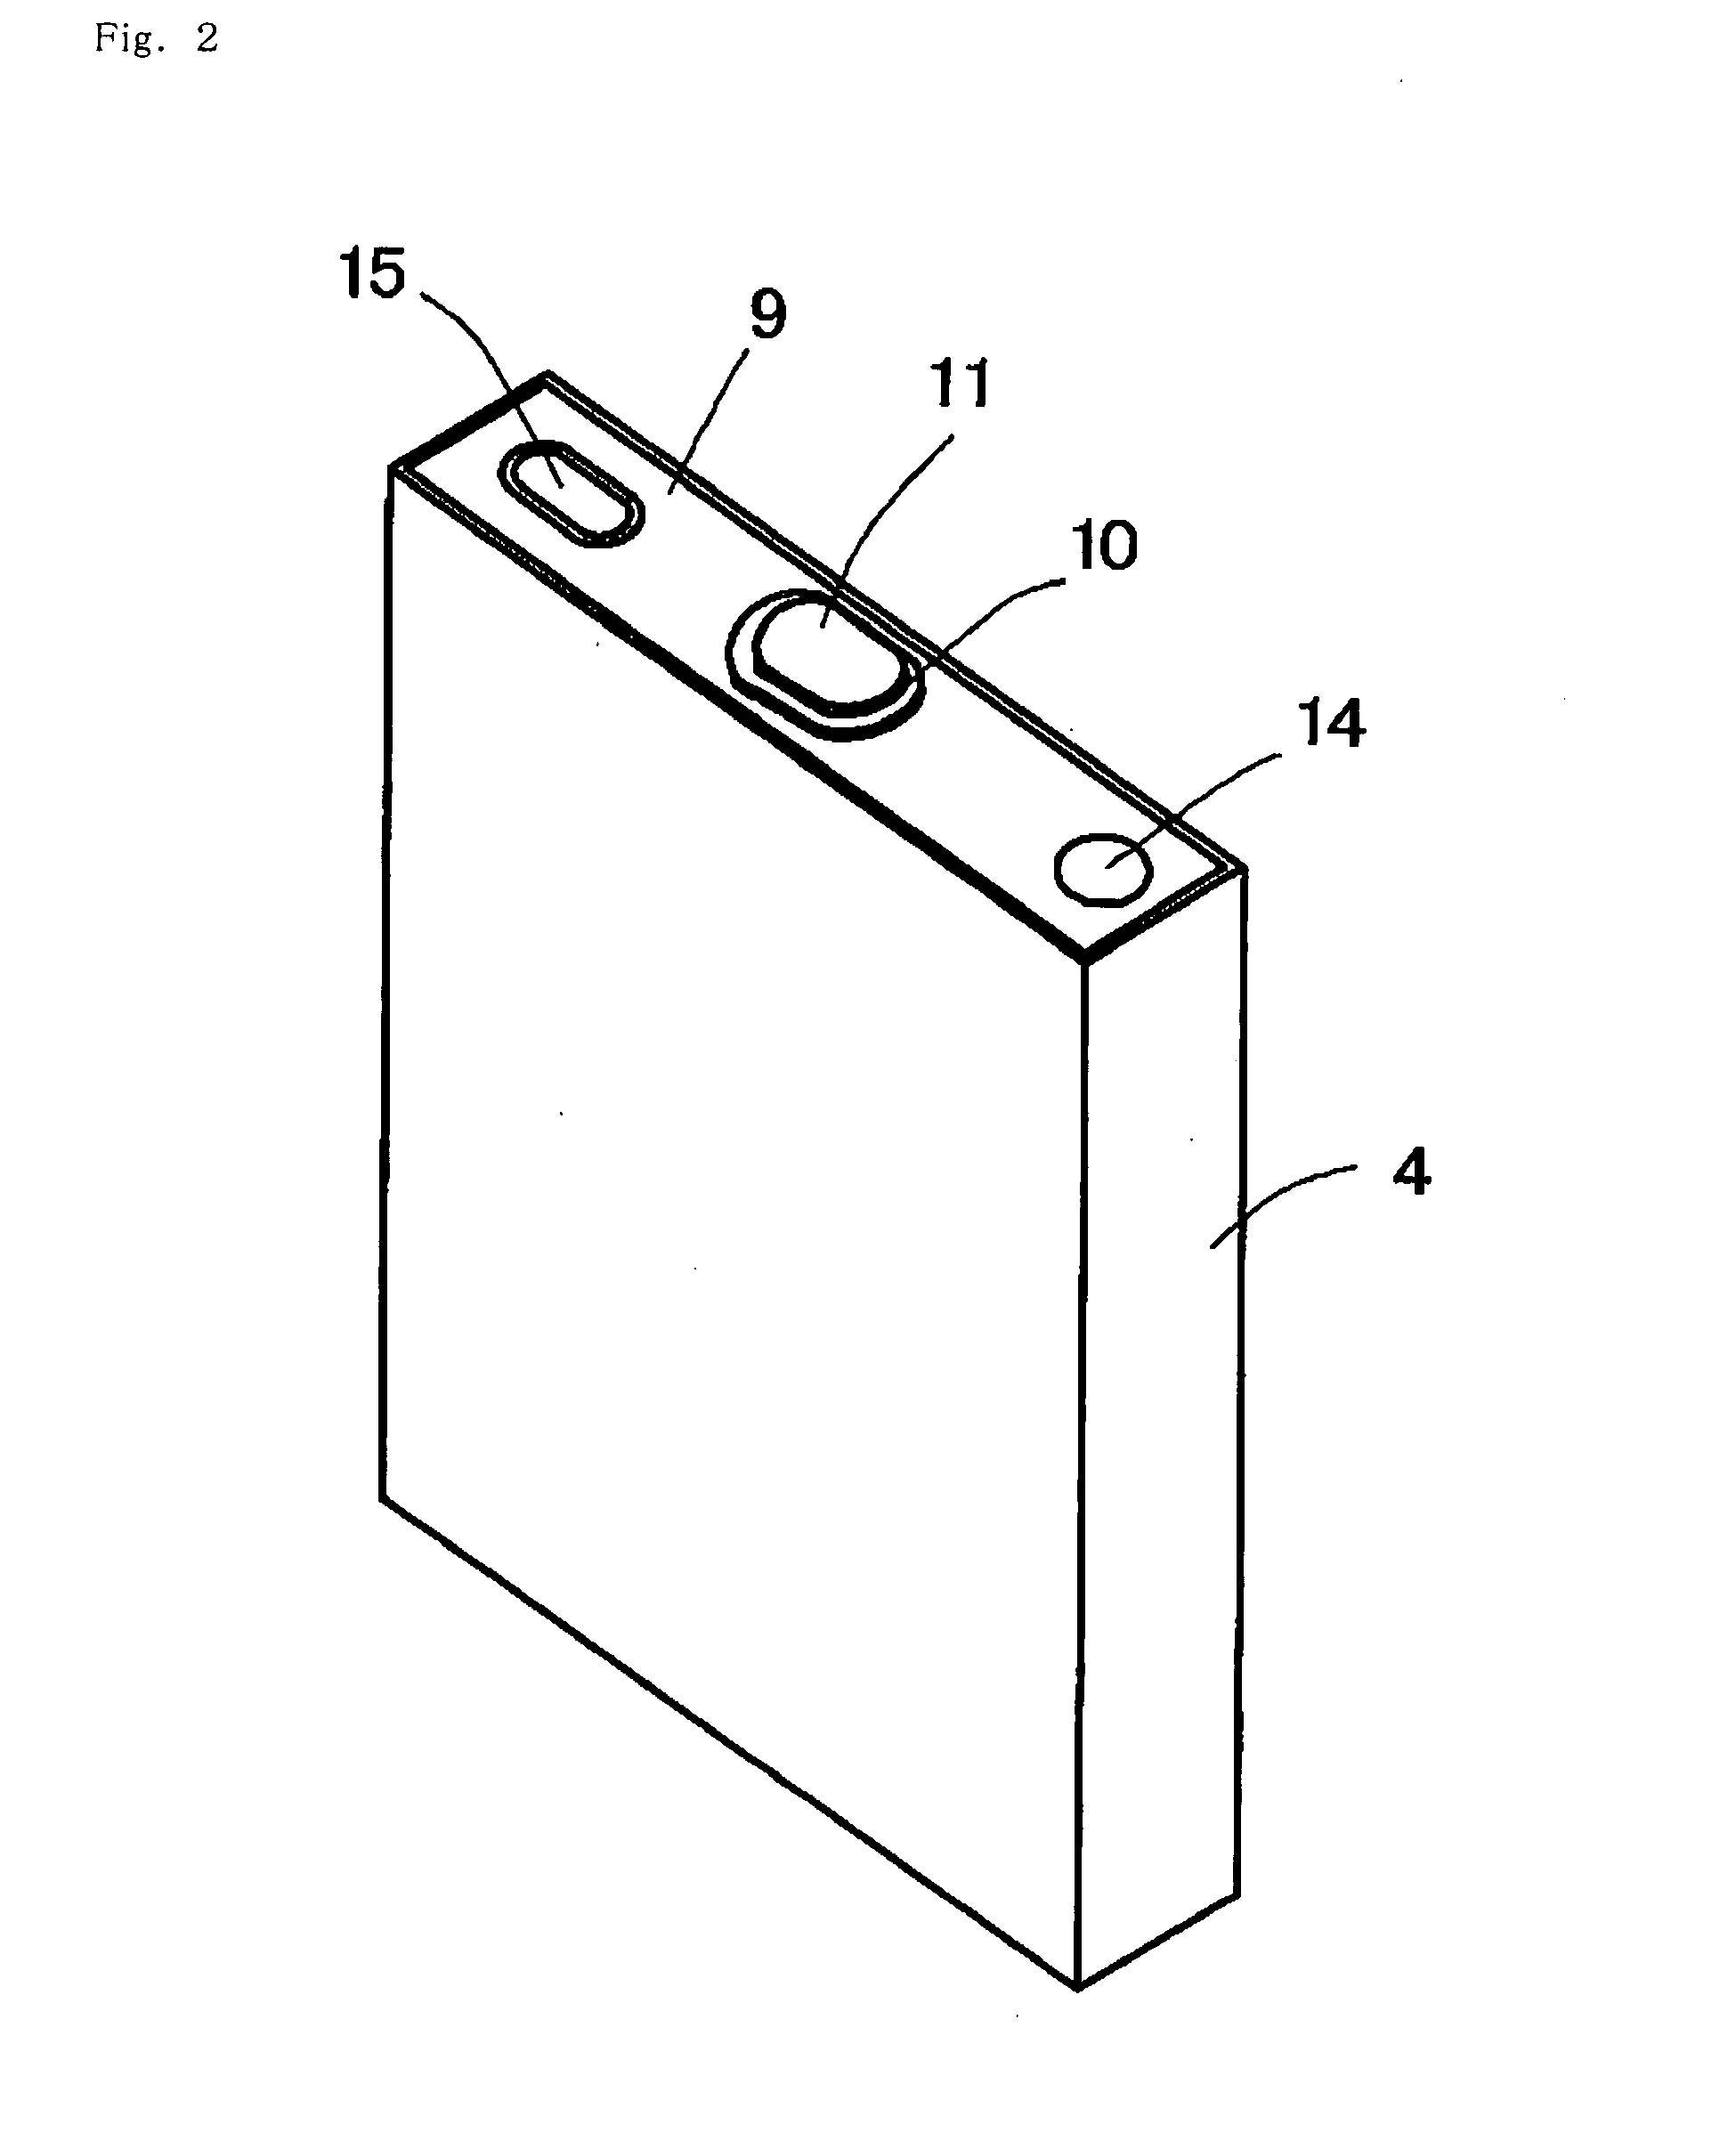 Nonaqueous secondary battery and method of using the same